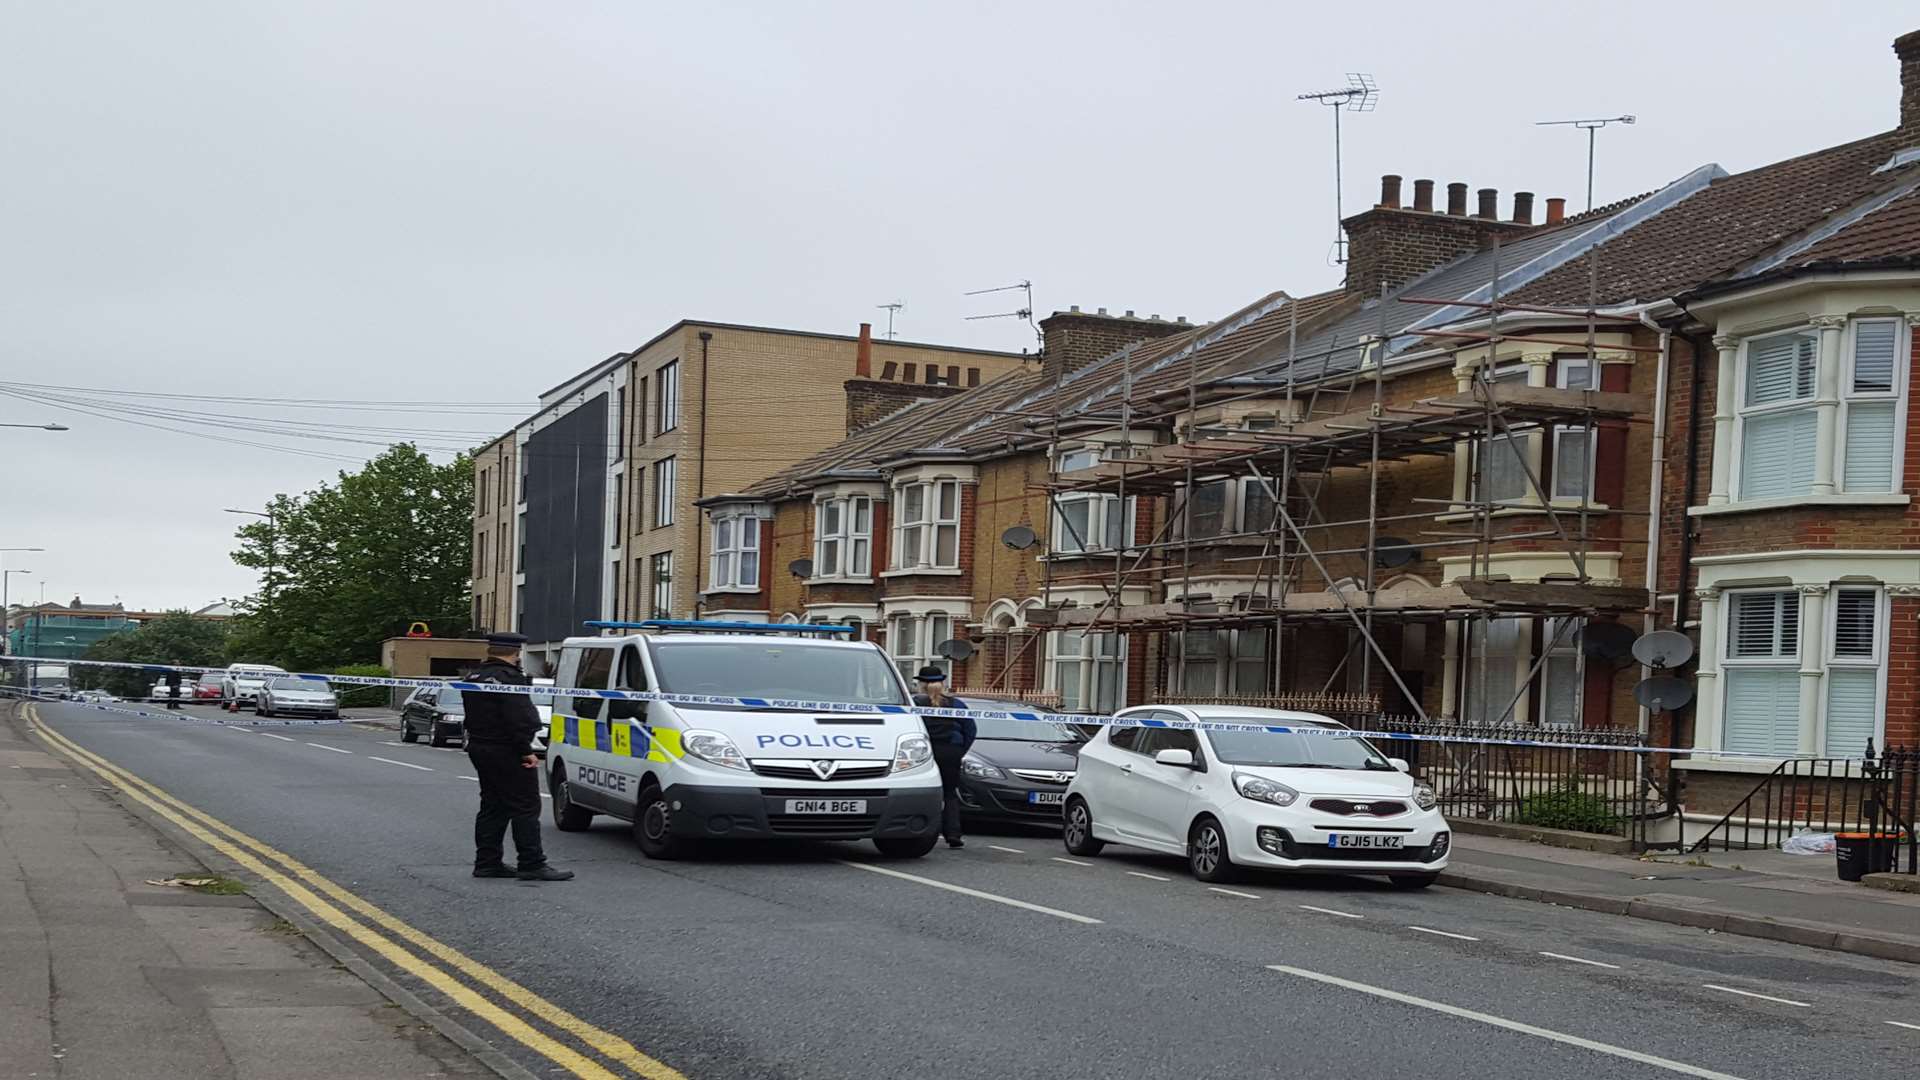 Police cordon off parts of Gravesend after the incident